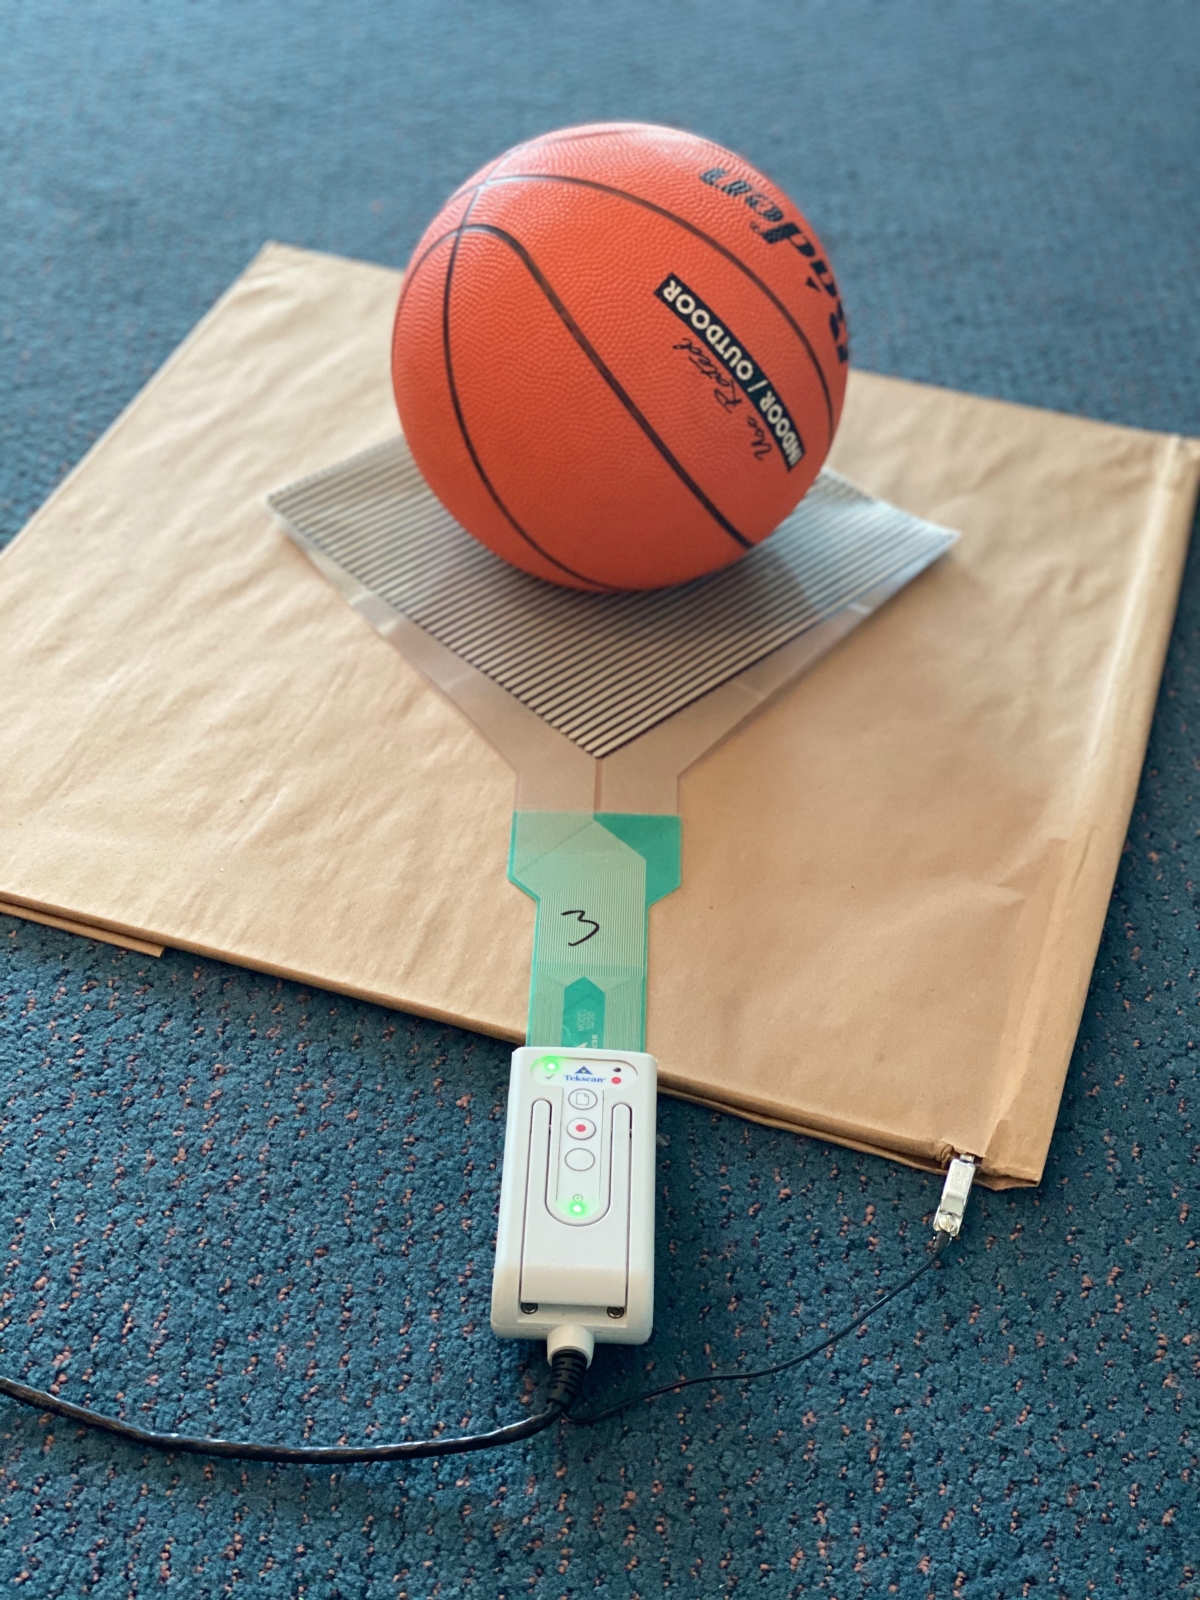 Figure 1: Image of the water-filled basketball, scanning electronics, and 5250 pressure mapping sensor used in the drop-test experiment.